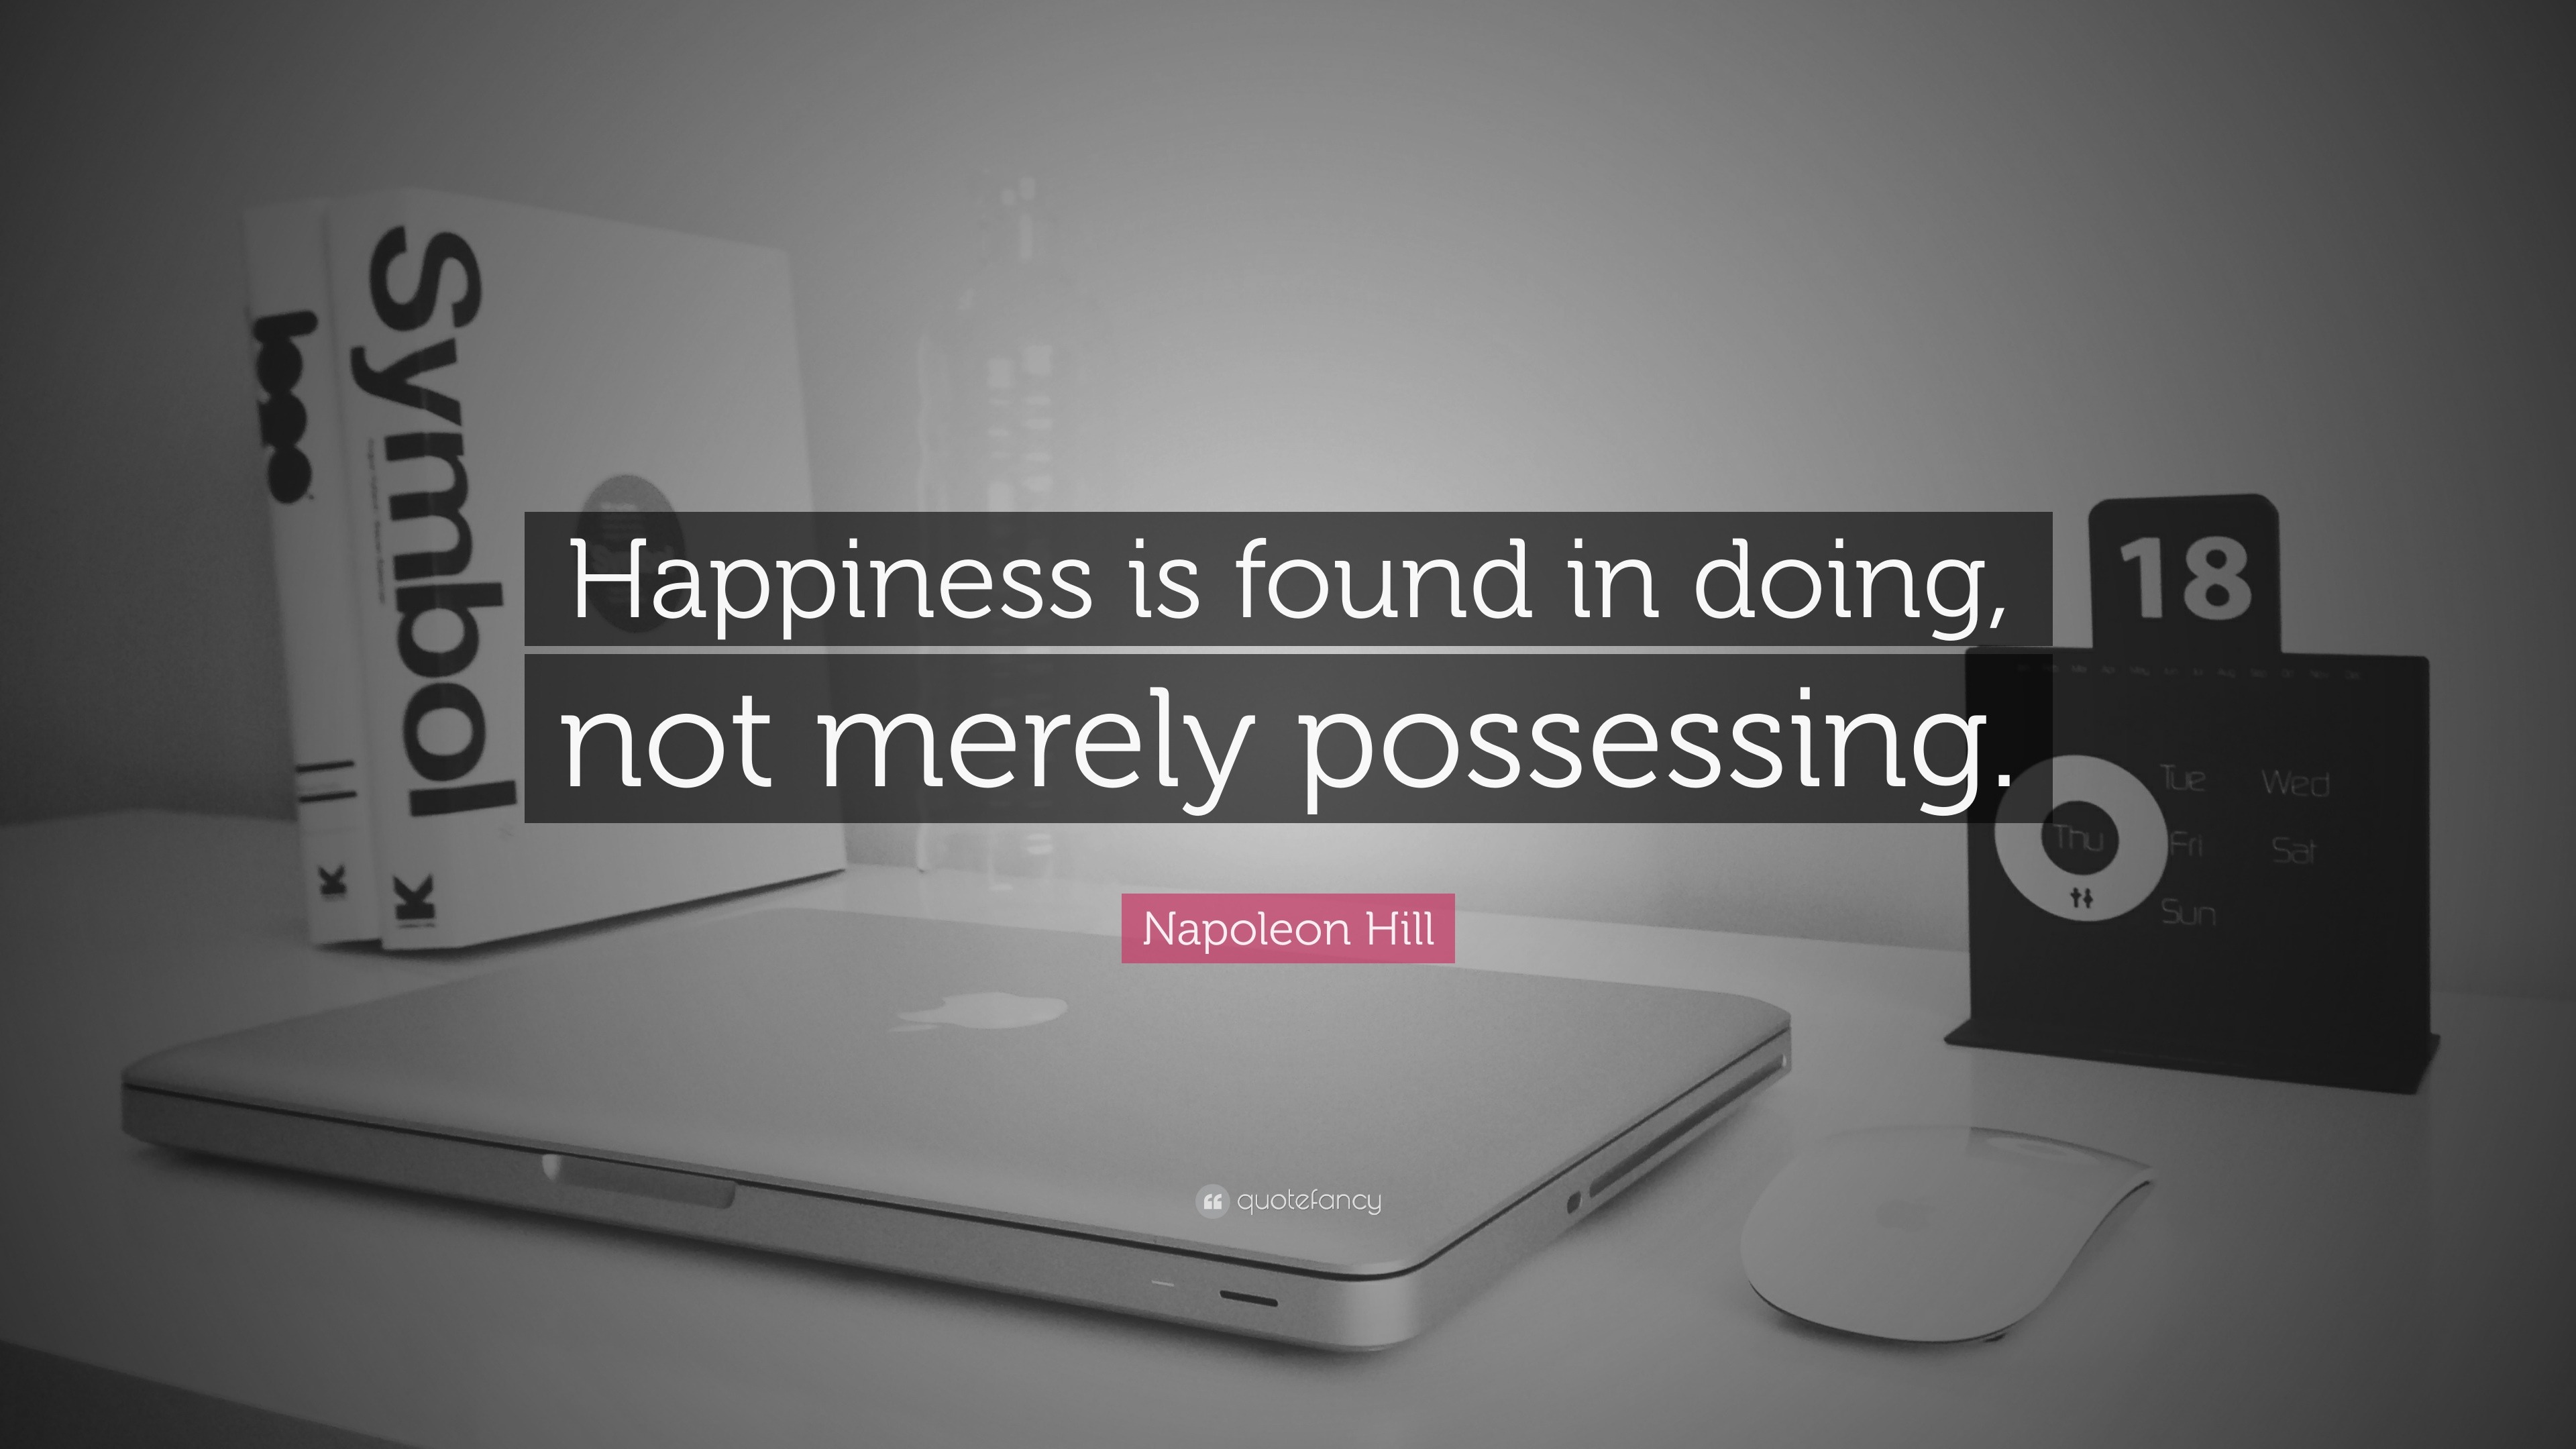 Napoleon Hill Quote: “Happiness is found in doing, not merely possessing. ”